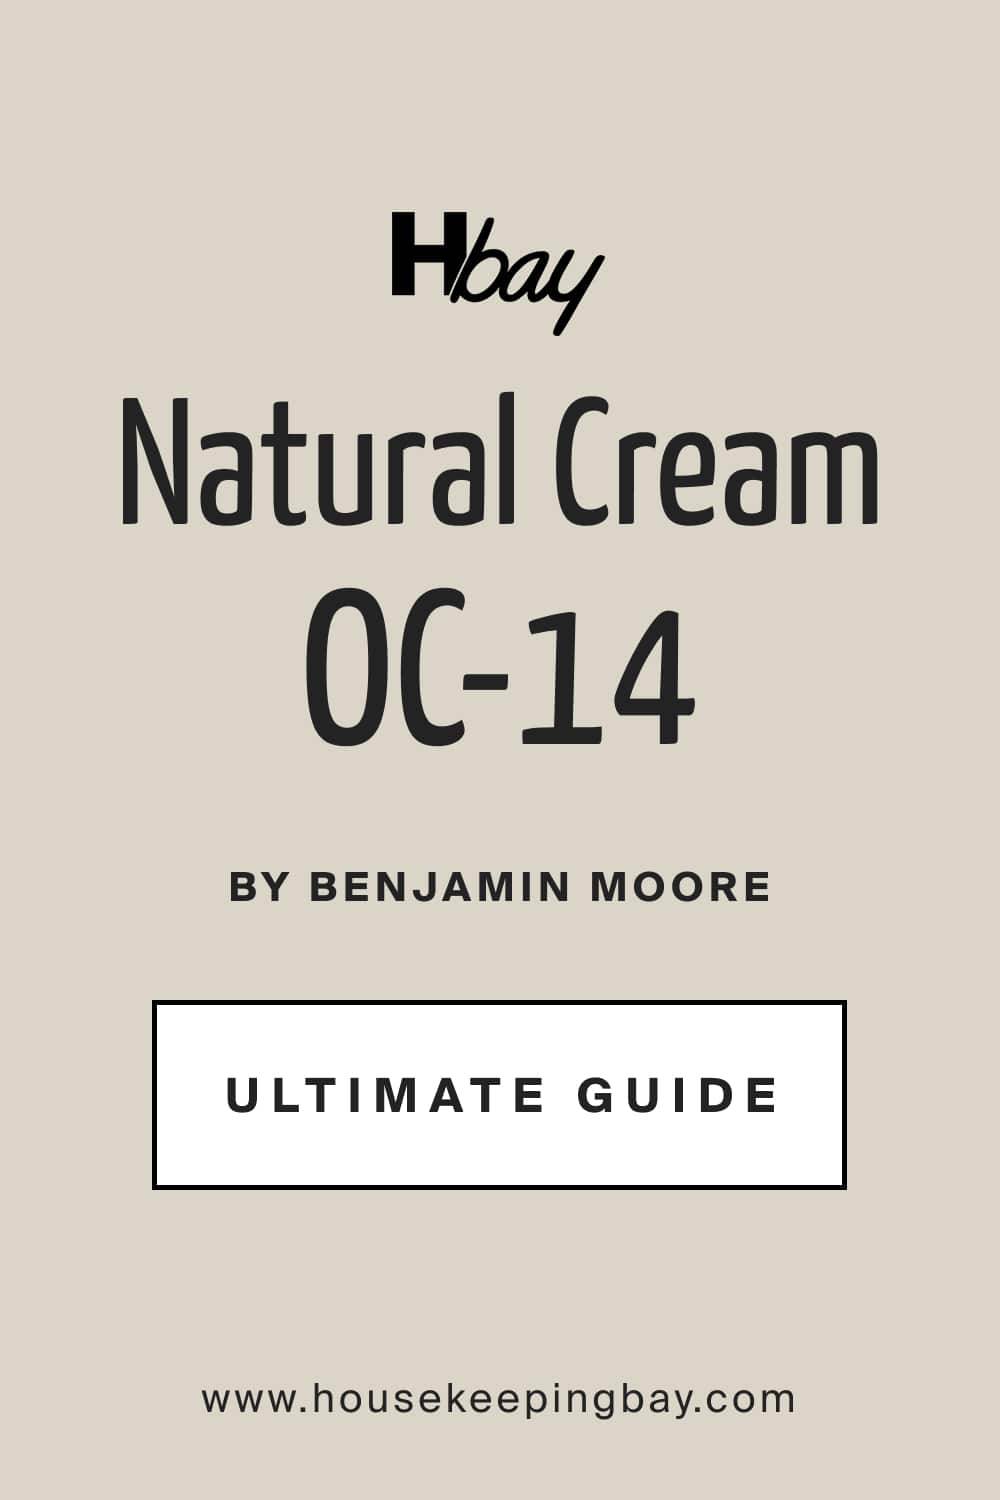 Natural Cream OC 14 by Sherwin Williams Ultimate Guide